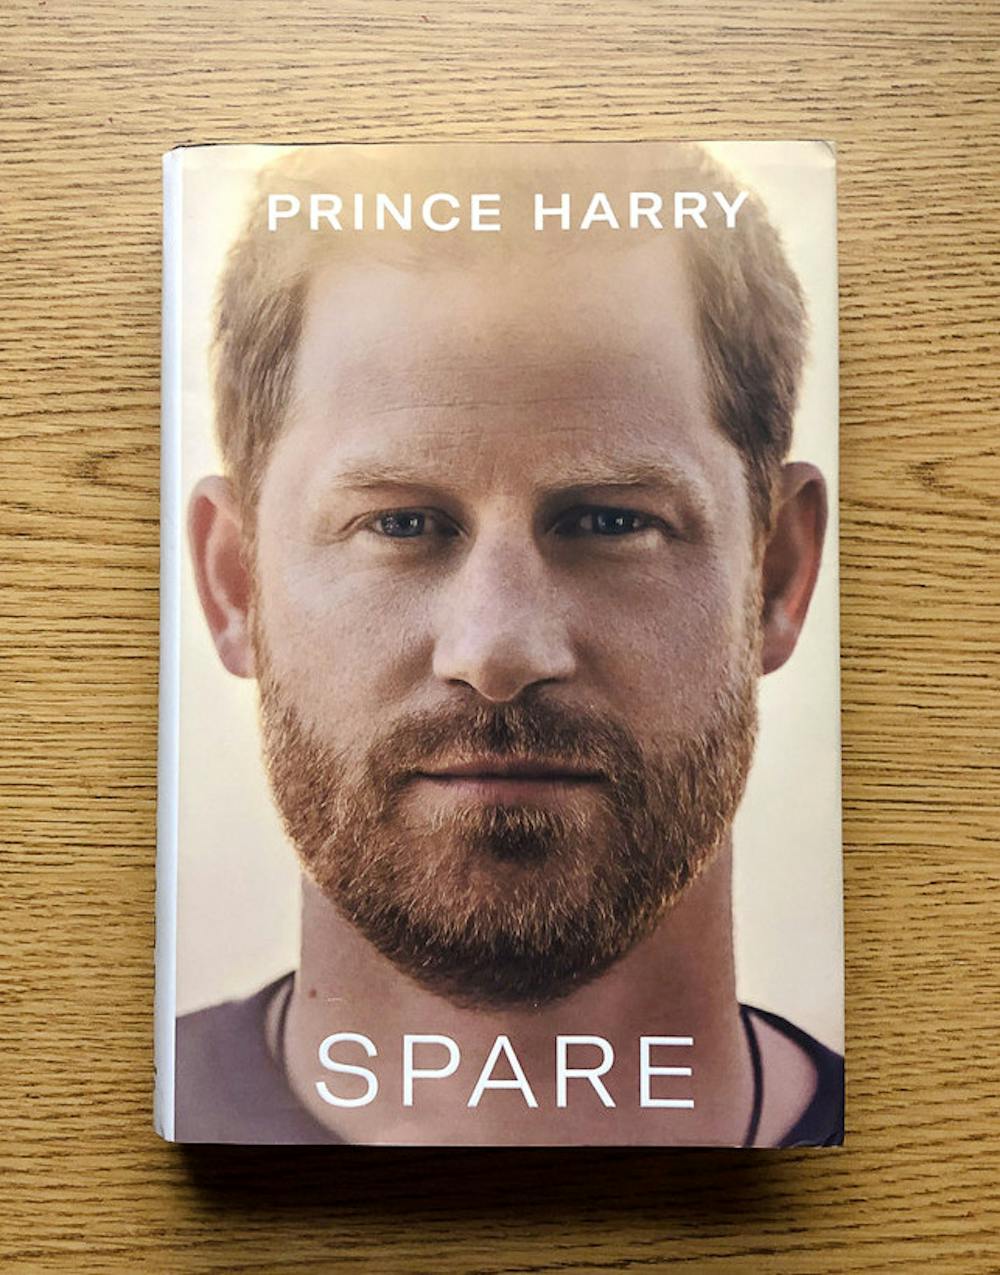 <p>&quot;Spare&quot; is divided into three parts chronicling the different stages of Harry’s life: grappling with inadequacy in young boyhood, learning his purpose as a soldier and holding himself to a higher standard as husband and father.</p>